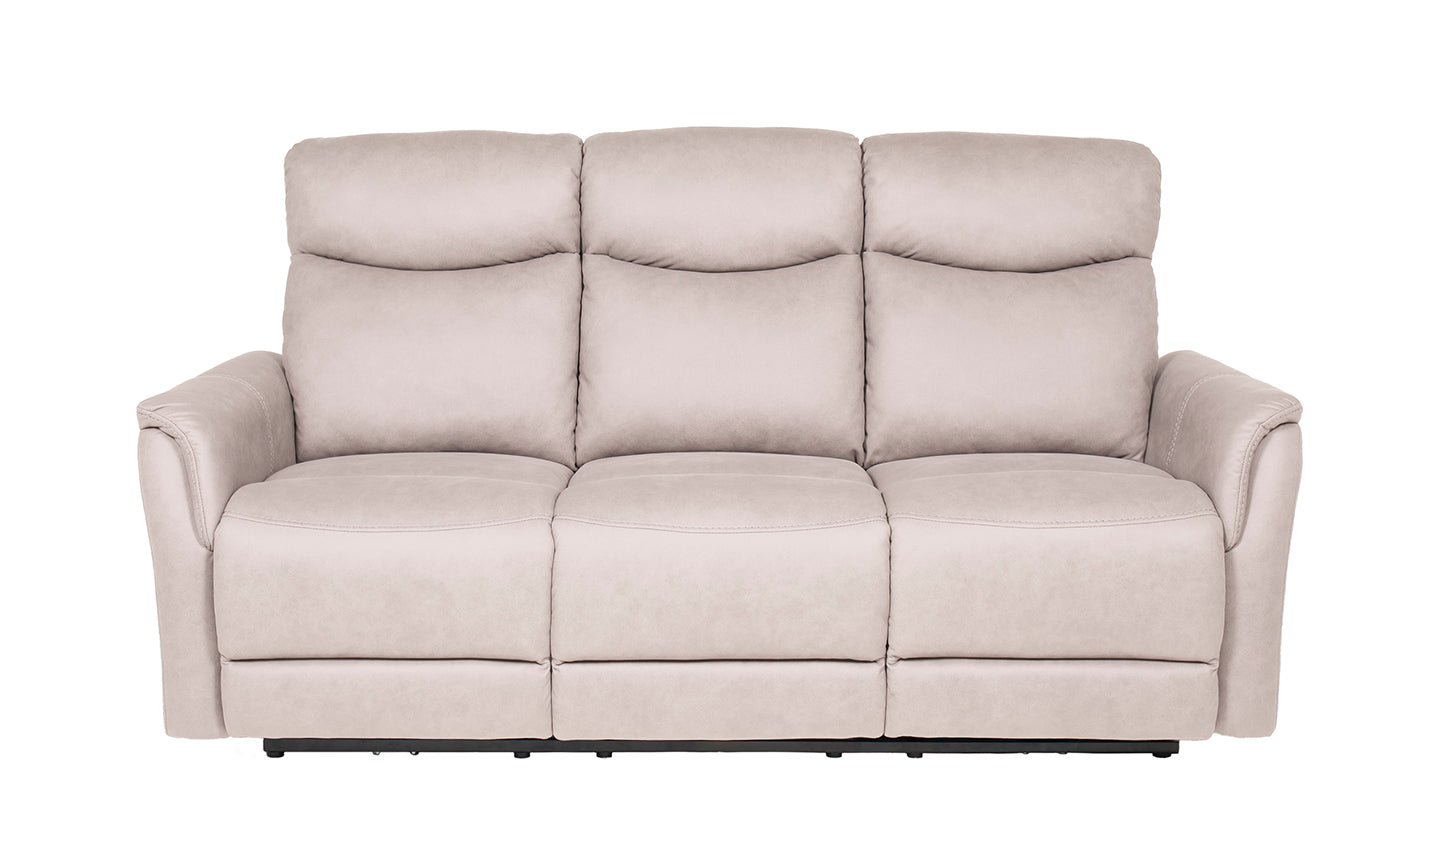 Mortimer 3 Seater Electric Recliner - Taupe